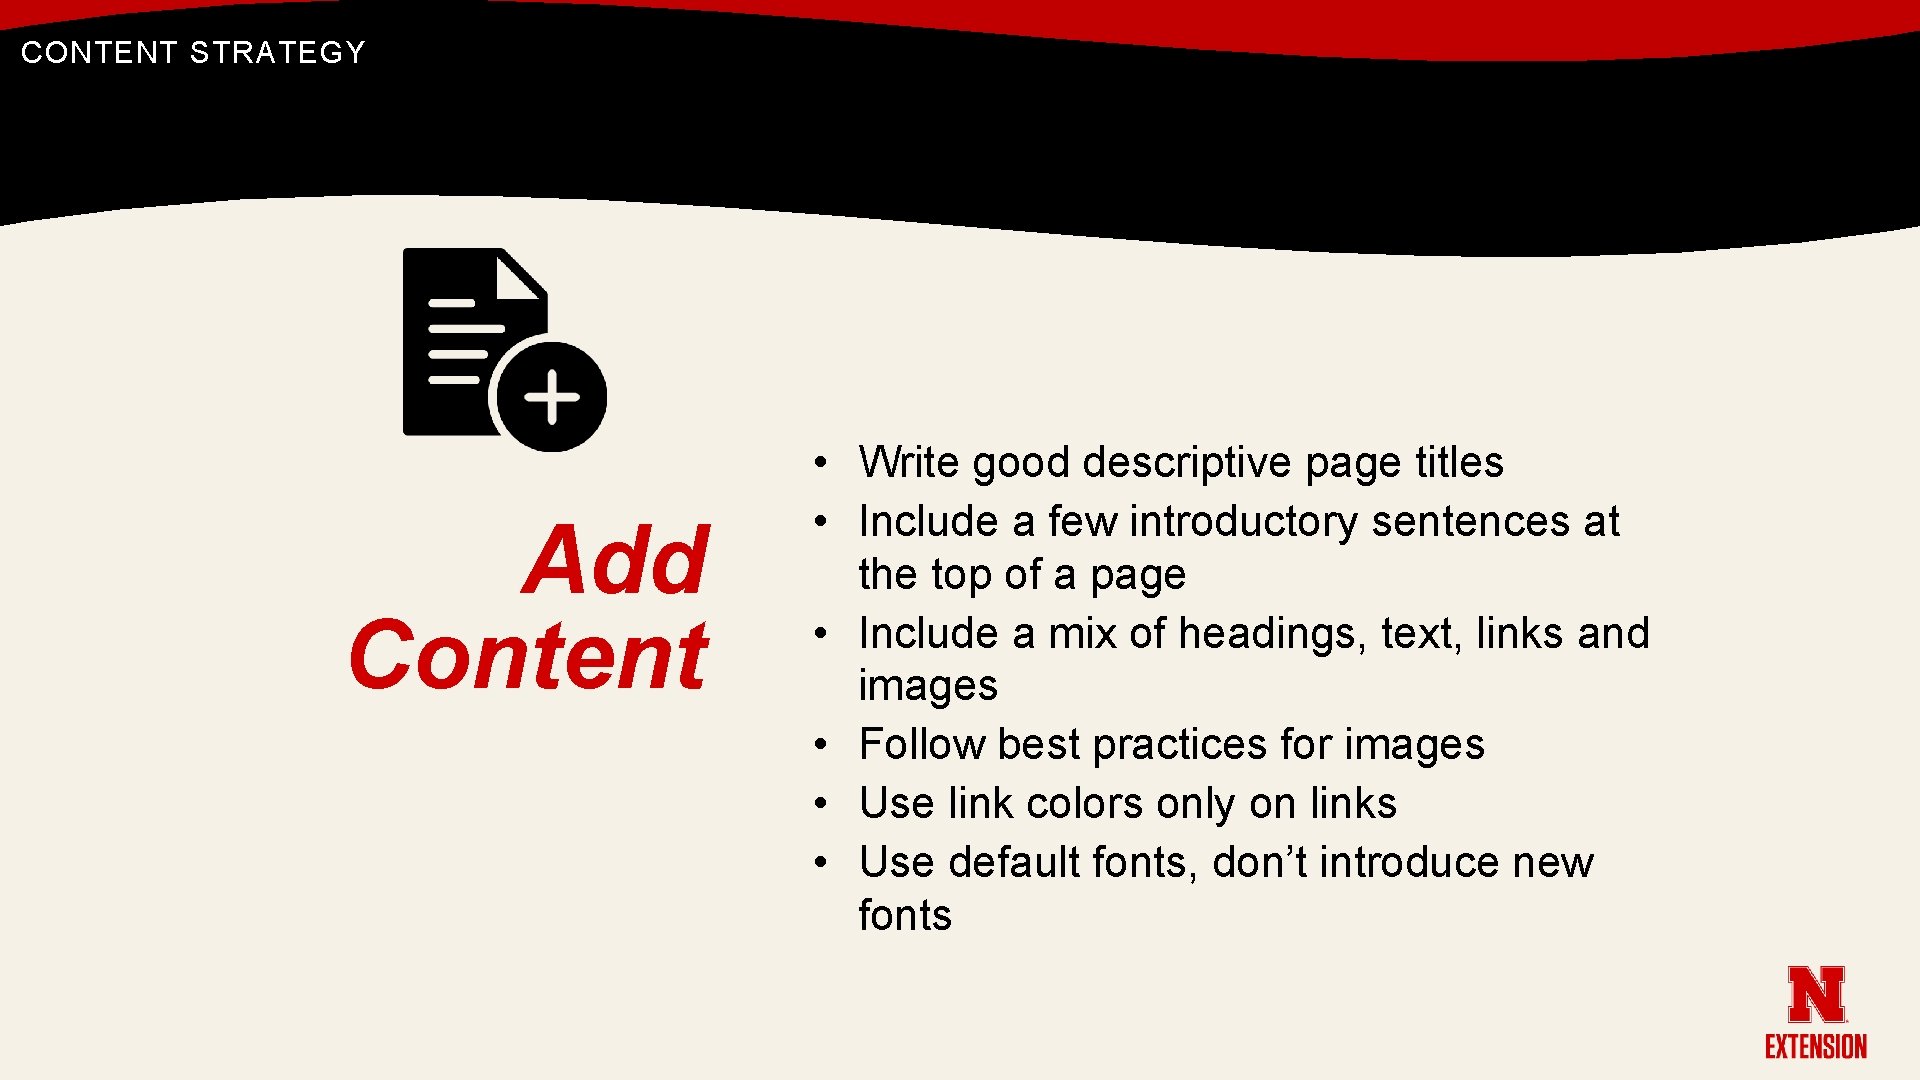 CONTENT STRATEGY Add Content • Write good descriptive page titles • Include a few